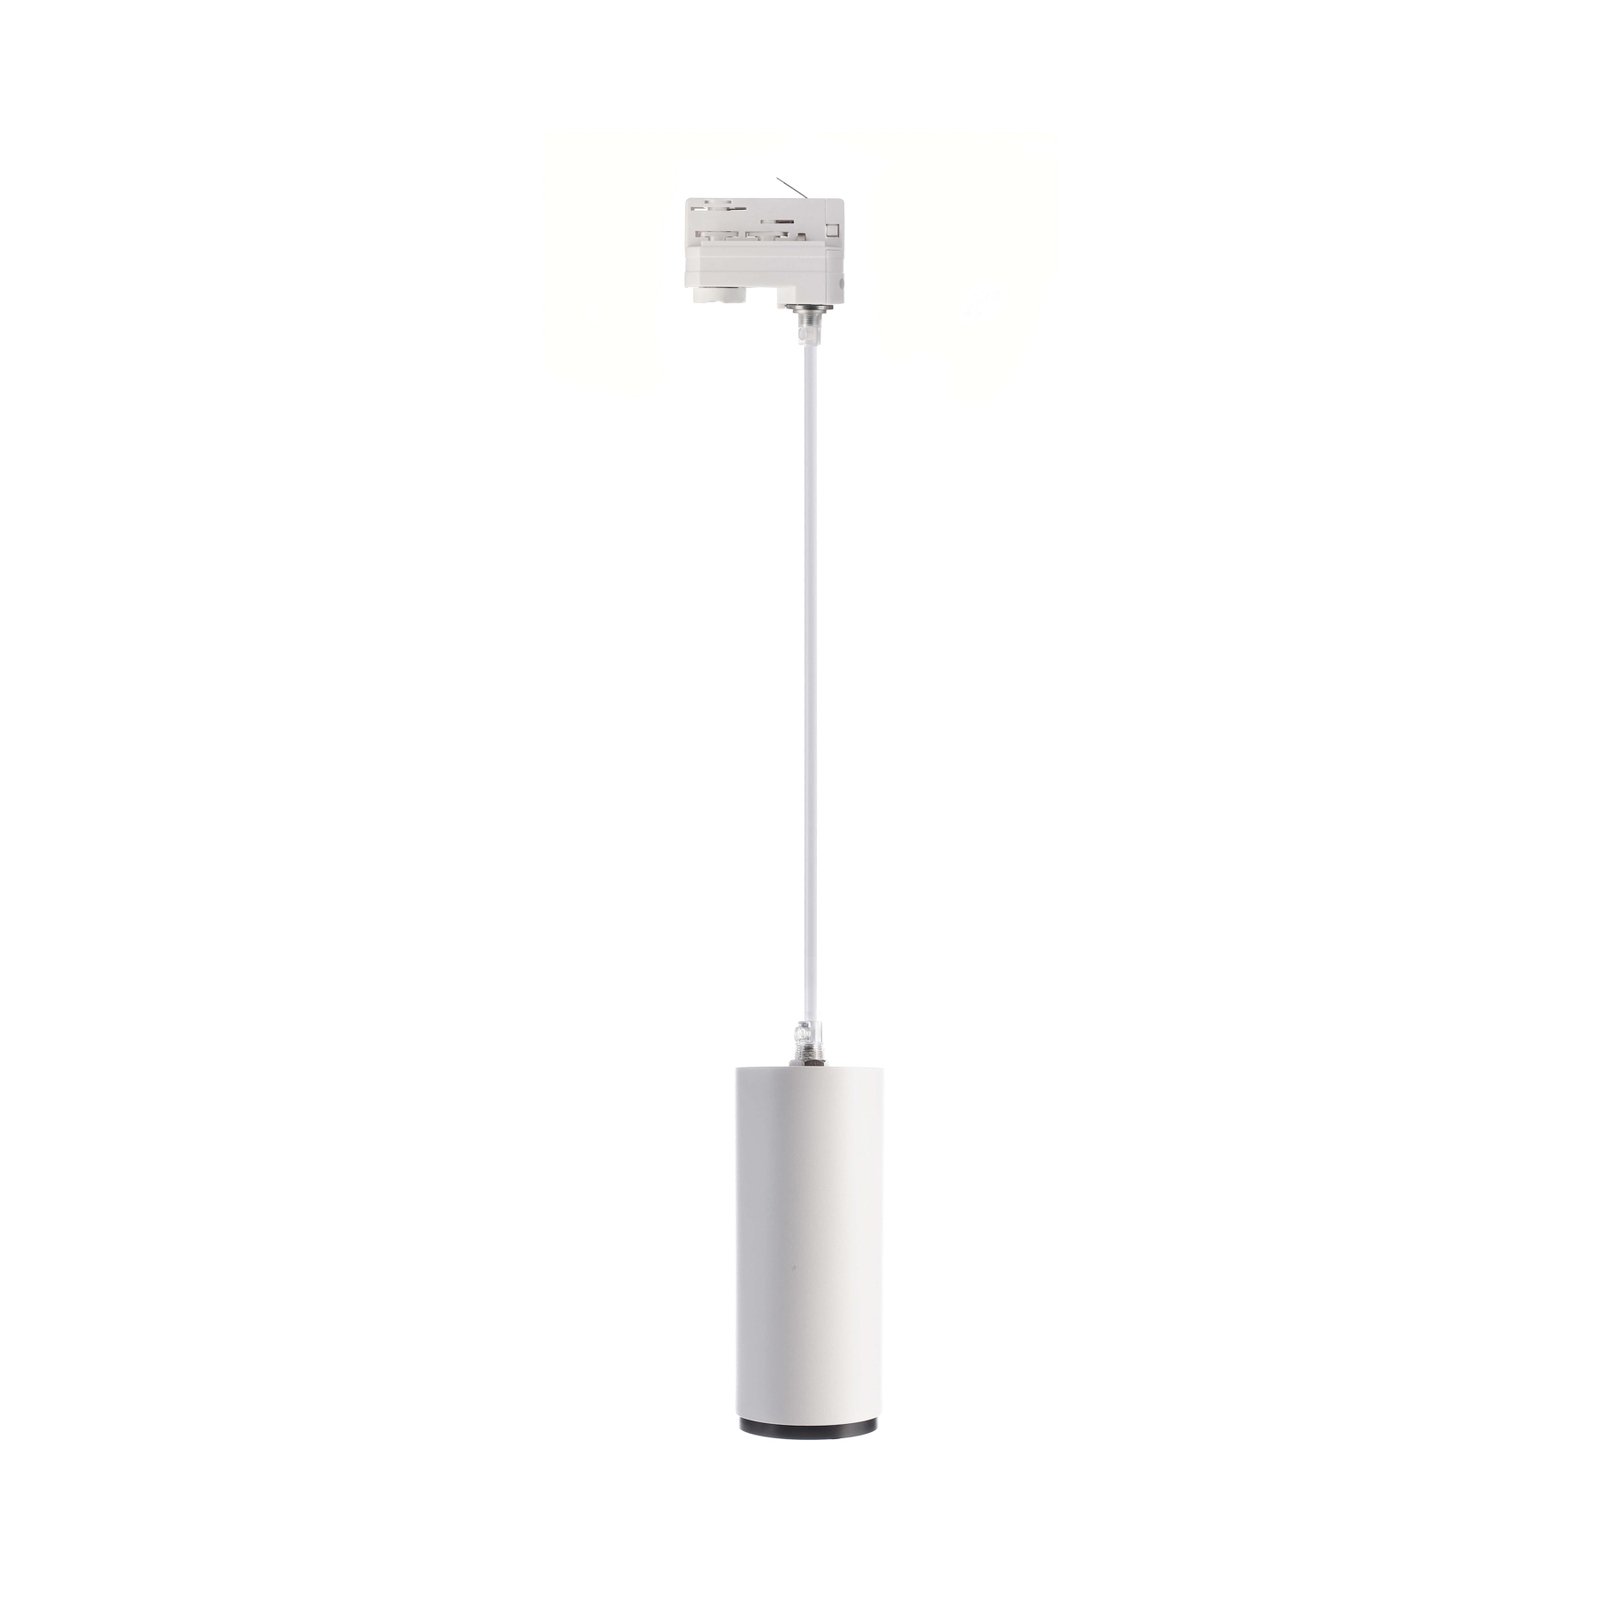 LED hanglamp Lucea 3-fase 10 W wit